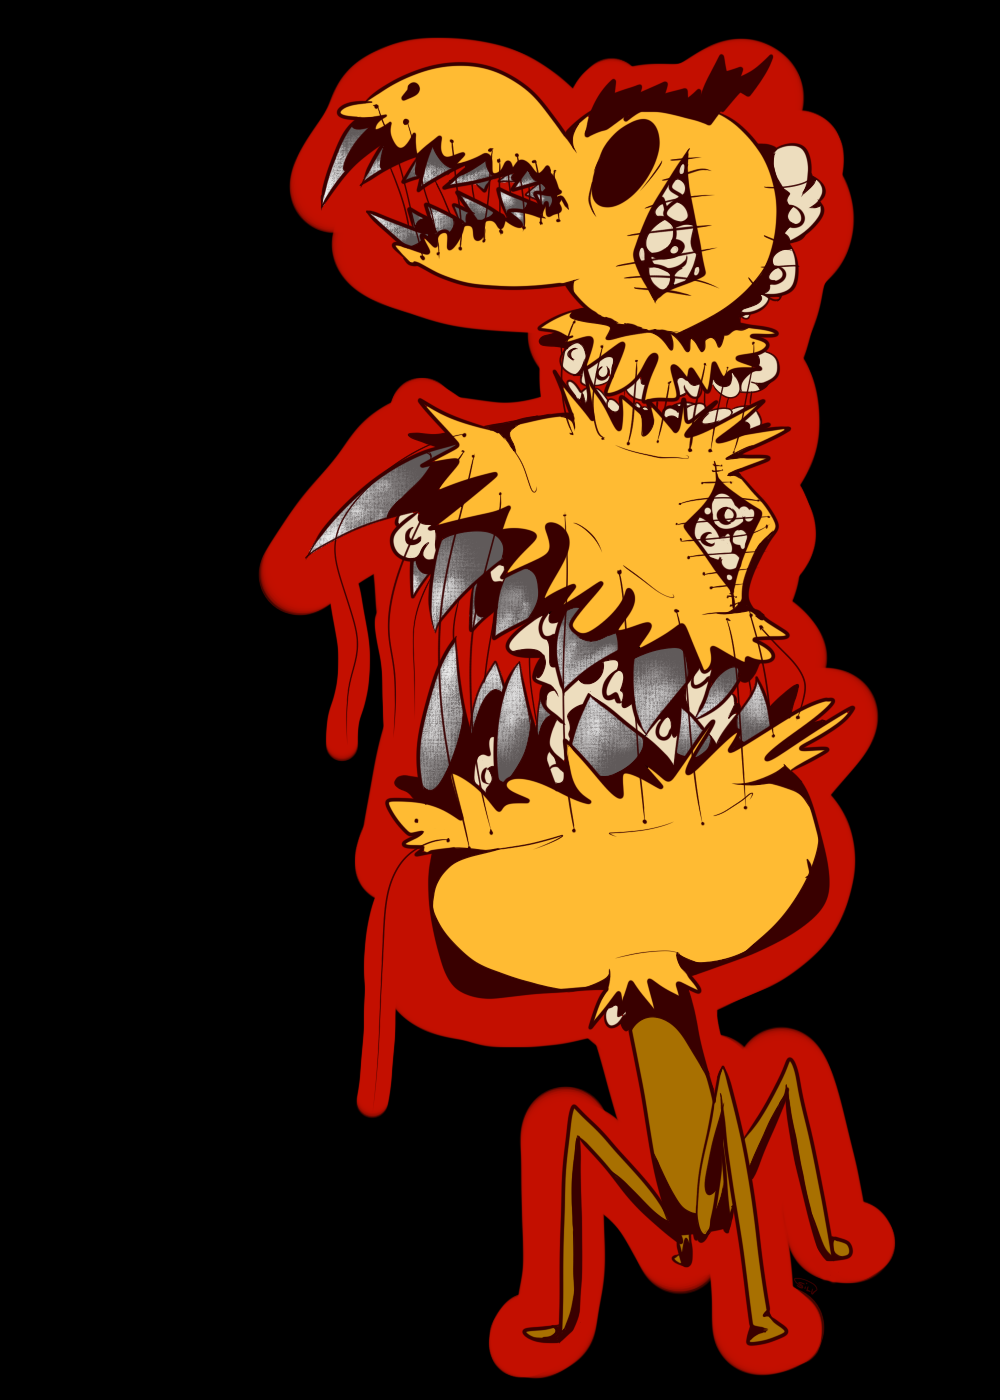 Mad Dummy Axetale Wiki Fandom Powered By Wikia free images, download Mad Du...